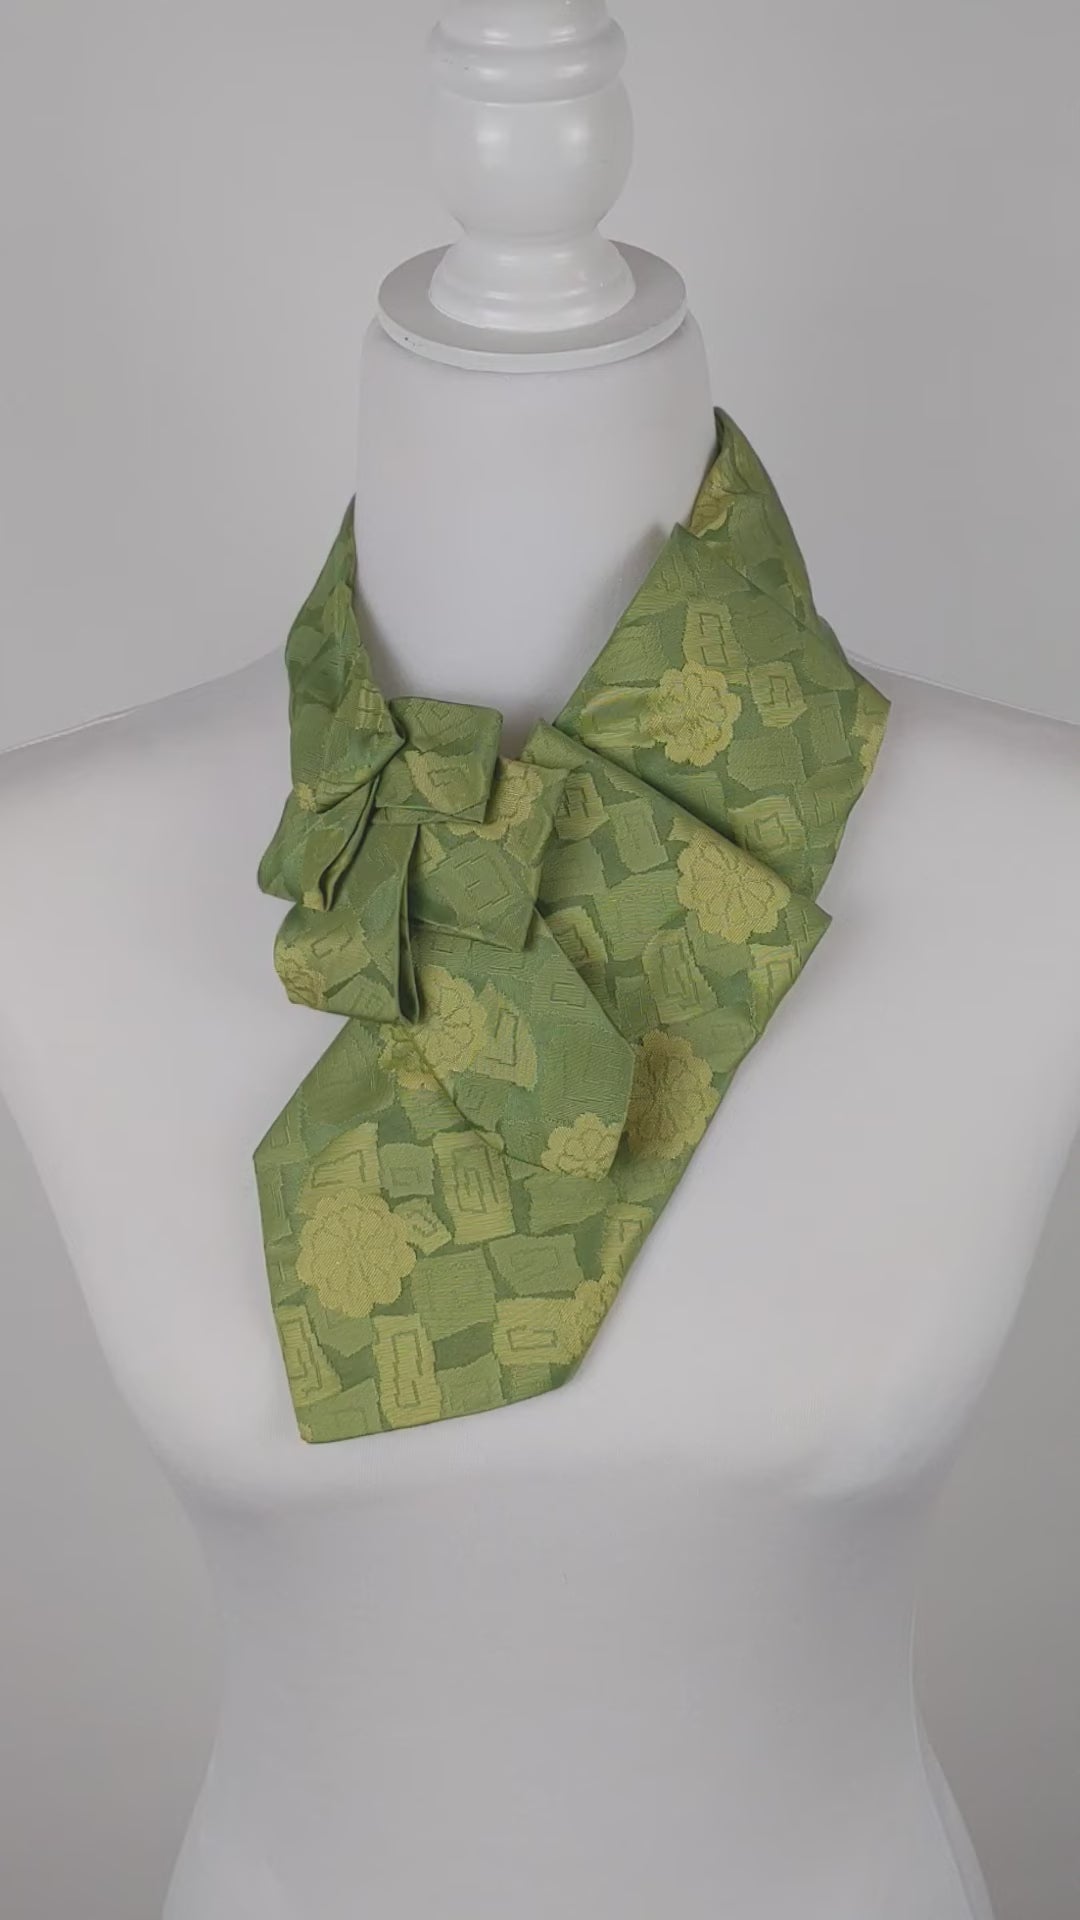 Women's Ascot Scarf In A Retro Lemon And Lime Floral Print.